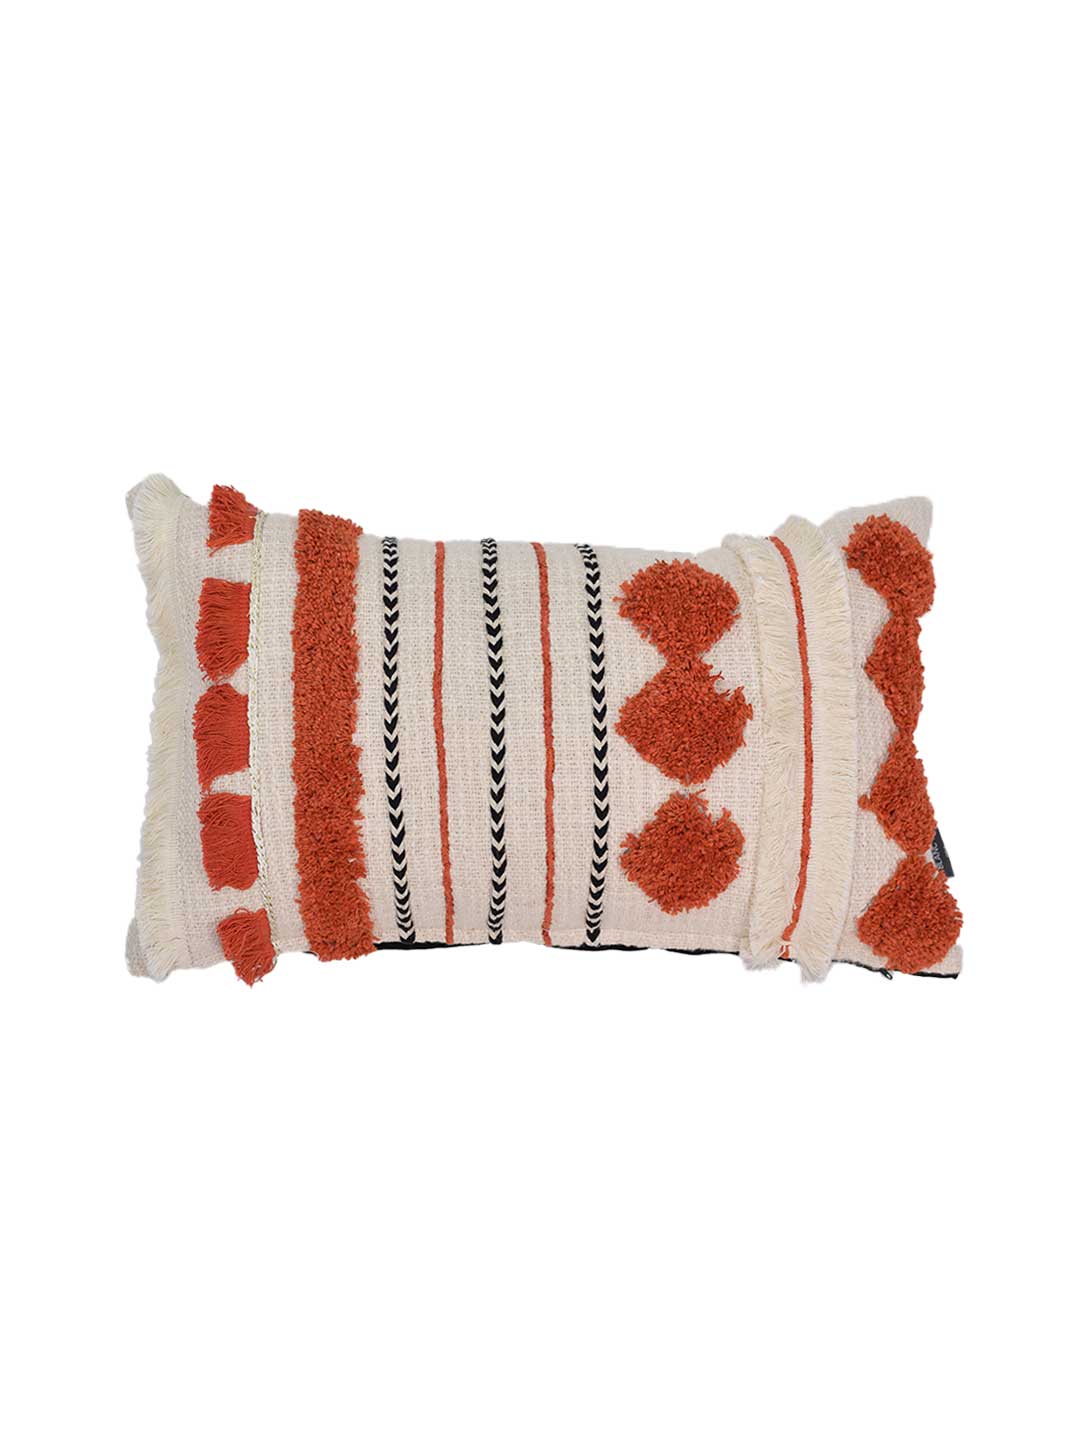 Blanc9 Tribal Vibes Cushion Cover with Filler 30x50cm